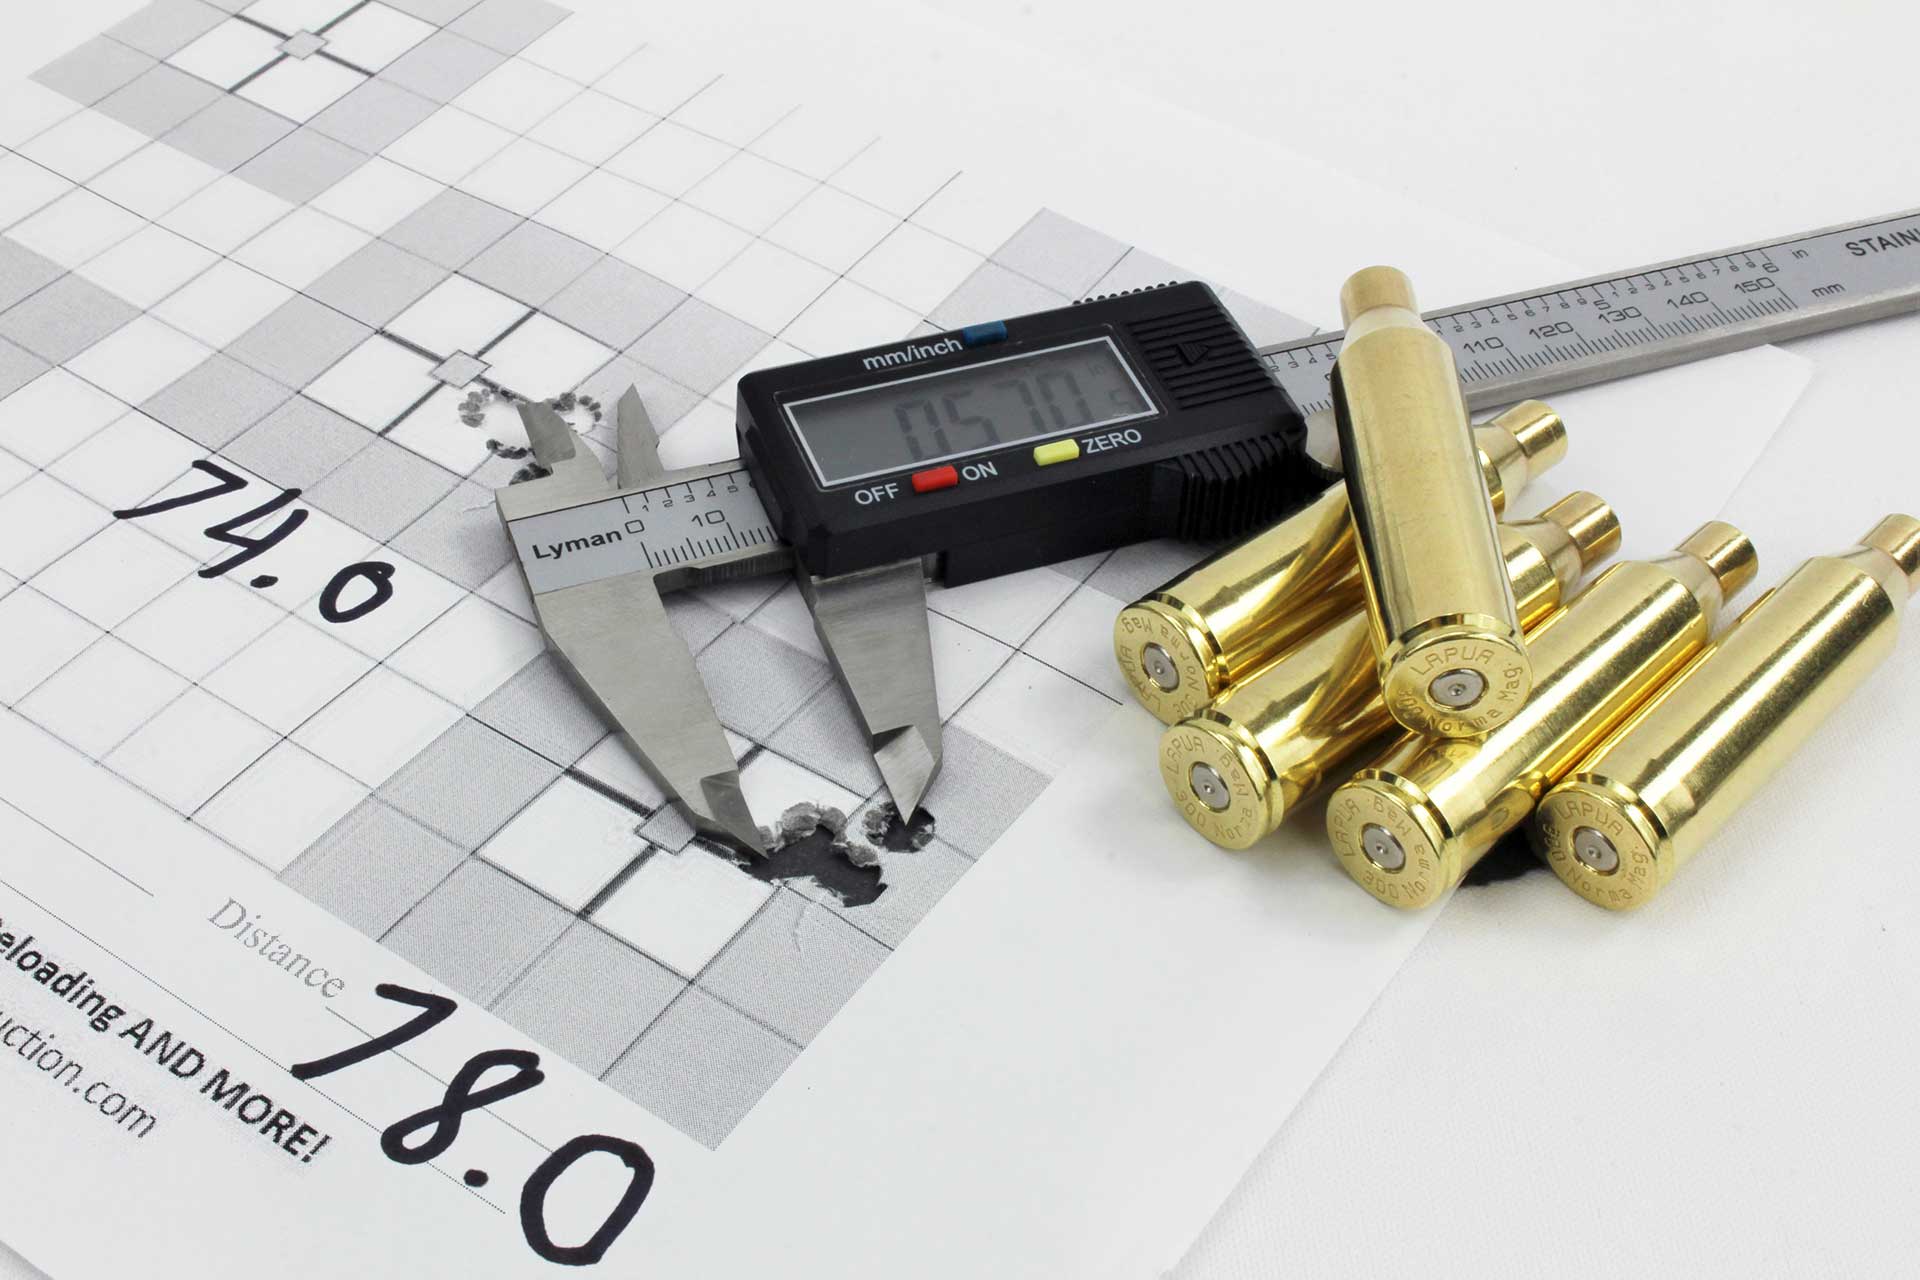 A set of digital calipers measuring an accurate shot group of nearly half an inch next to a group of bright, shiny, once-fired brass cartridge cases